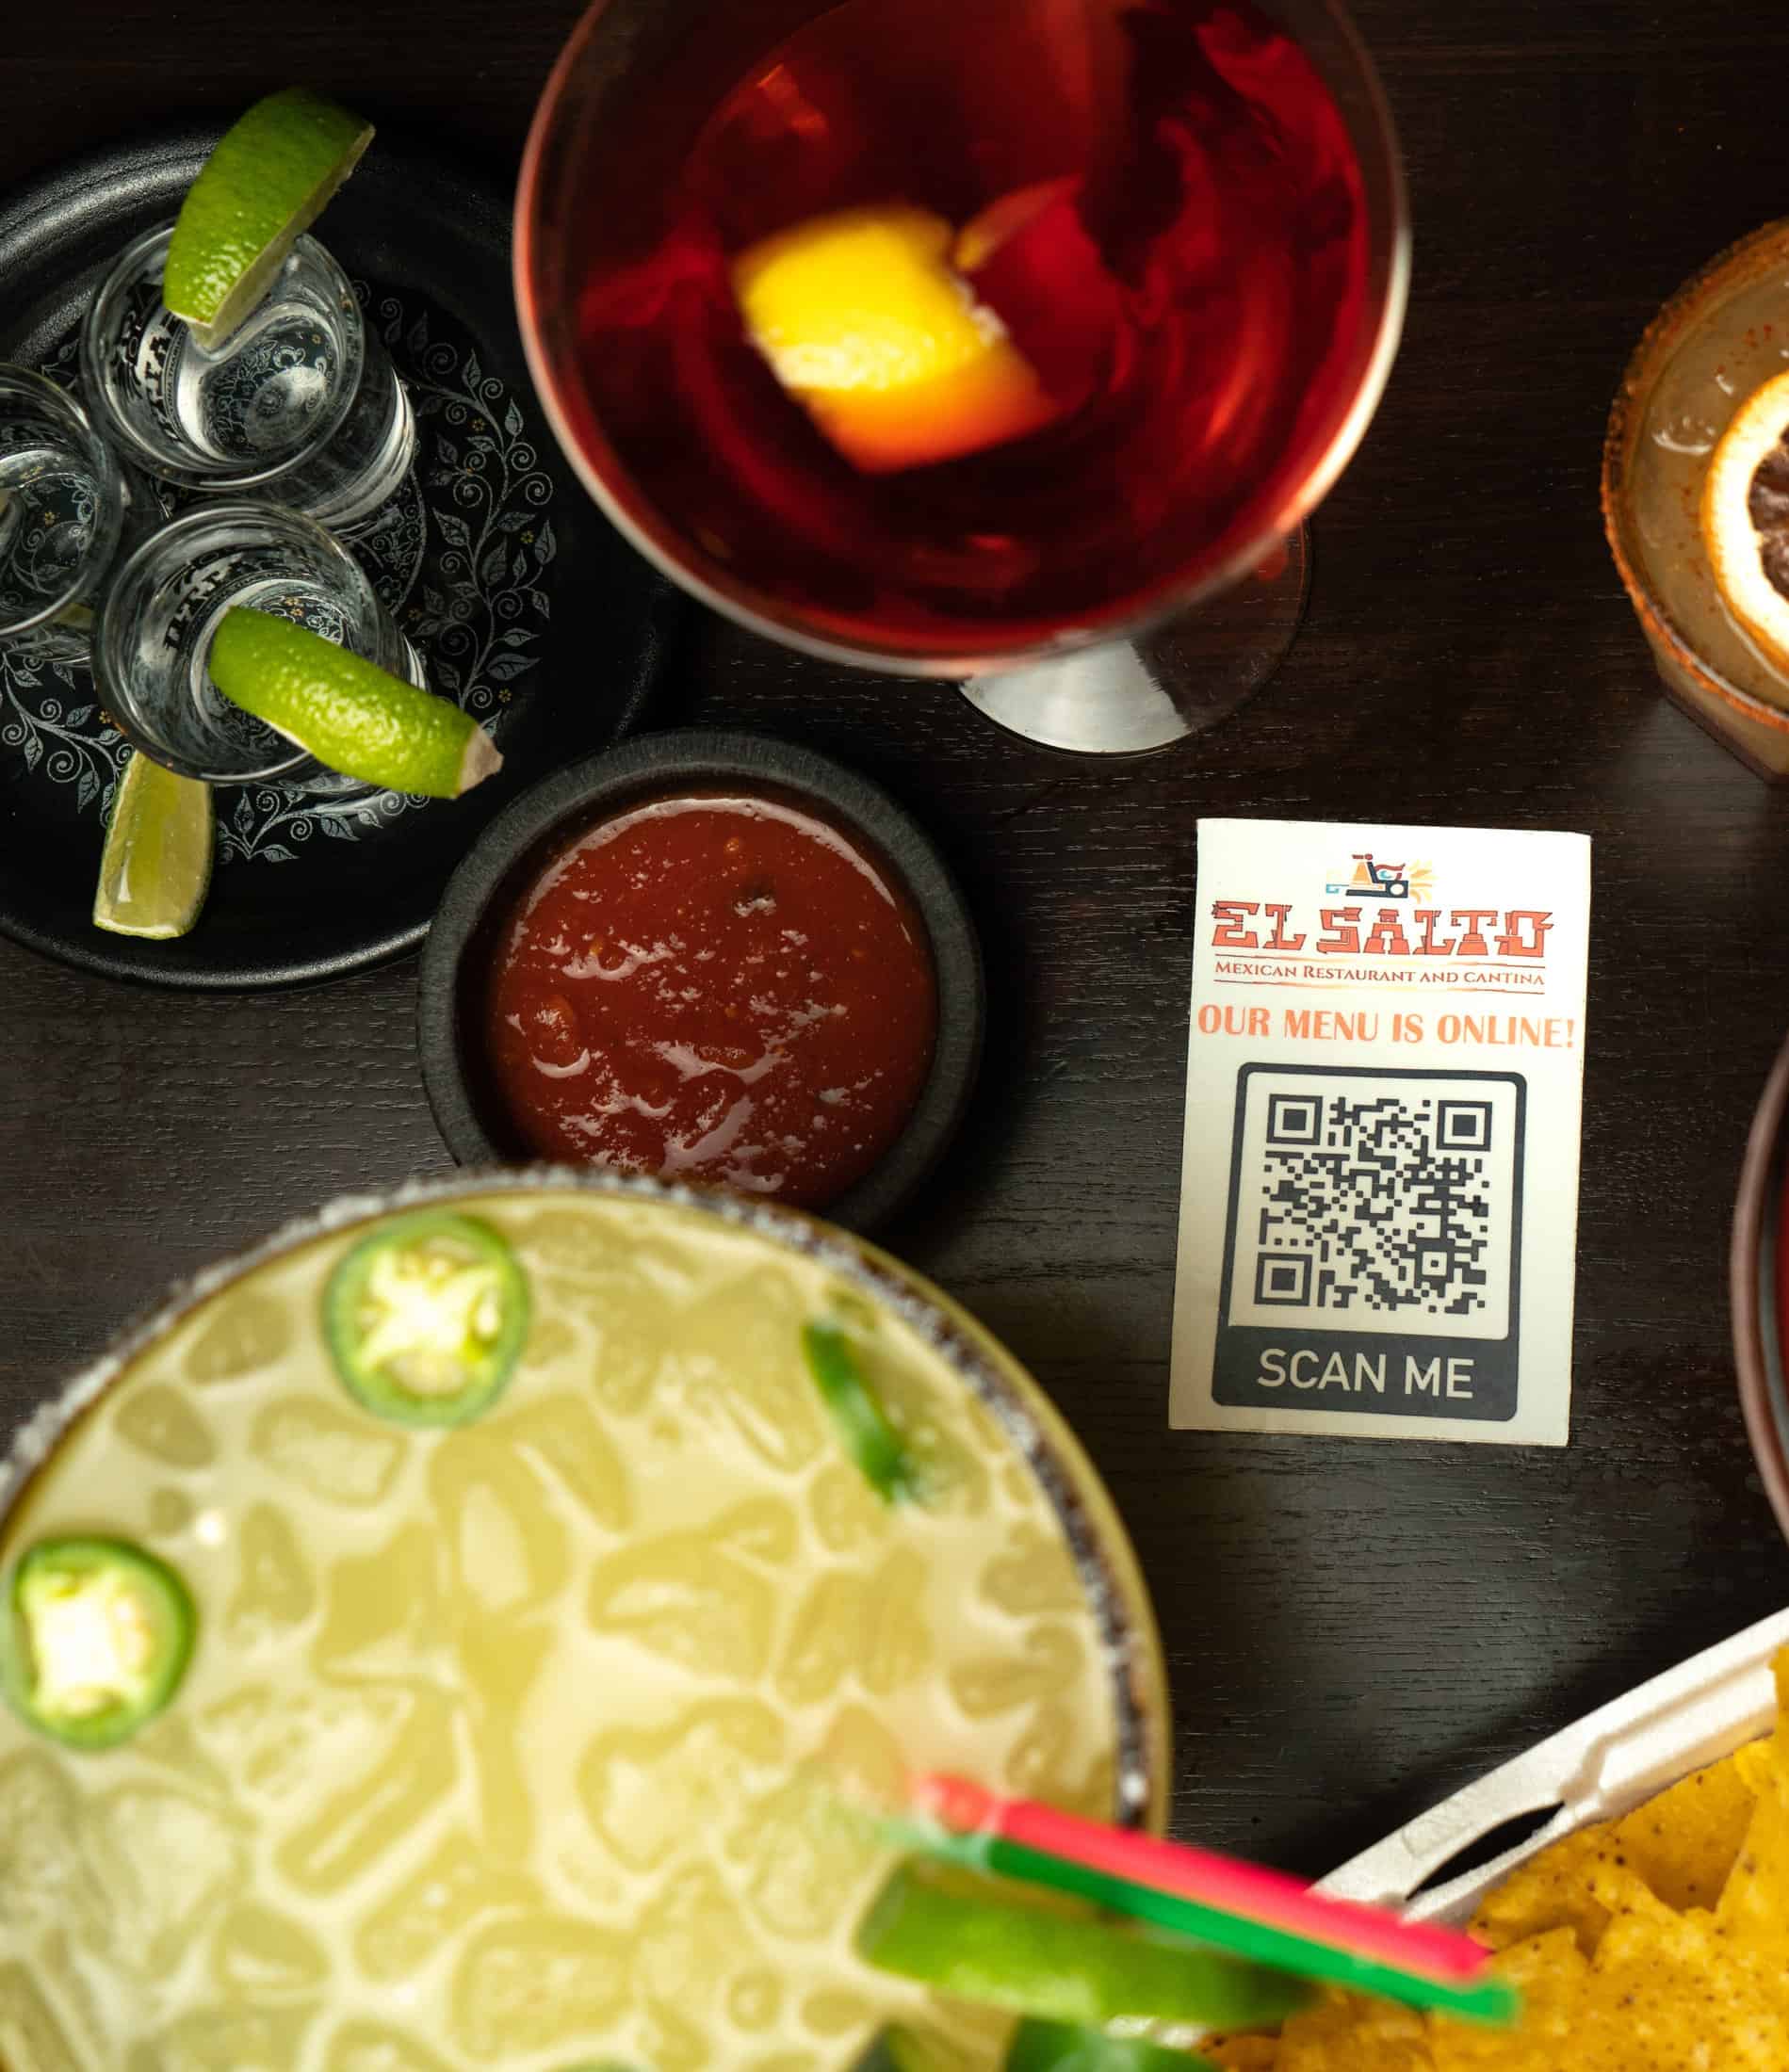 El Salto | Web Design and Content Creation for Mexican Restaurants in Northwest Indiana 19